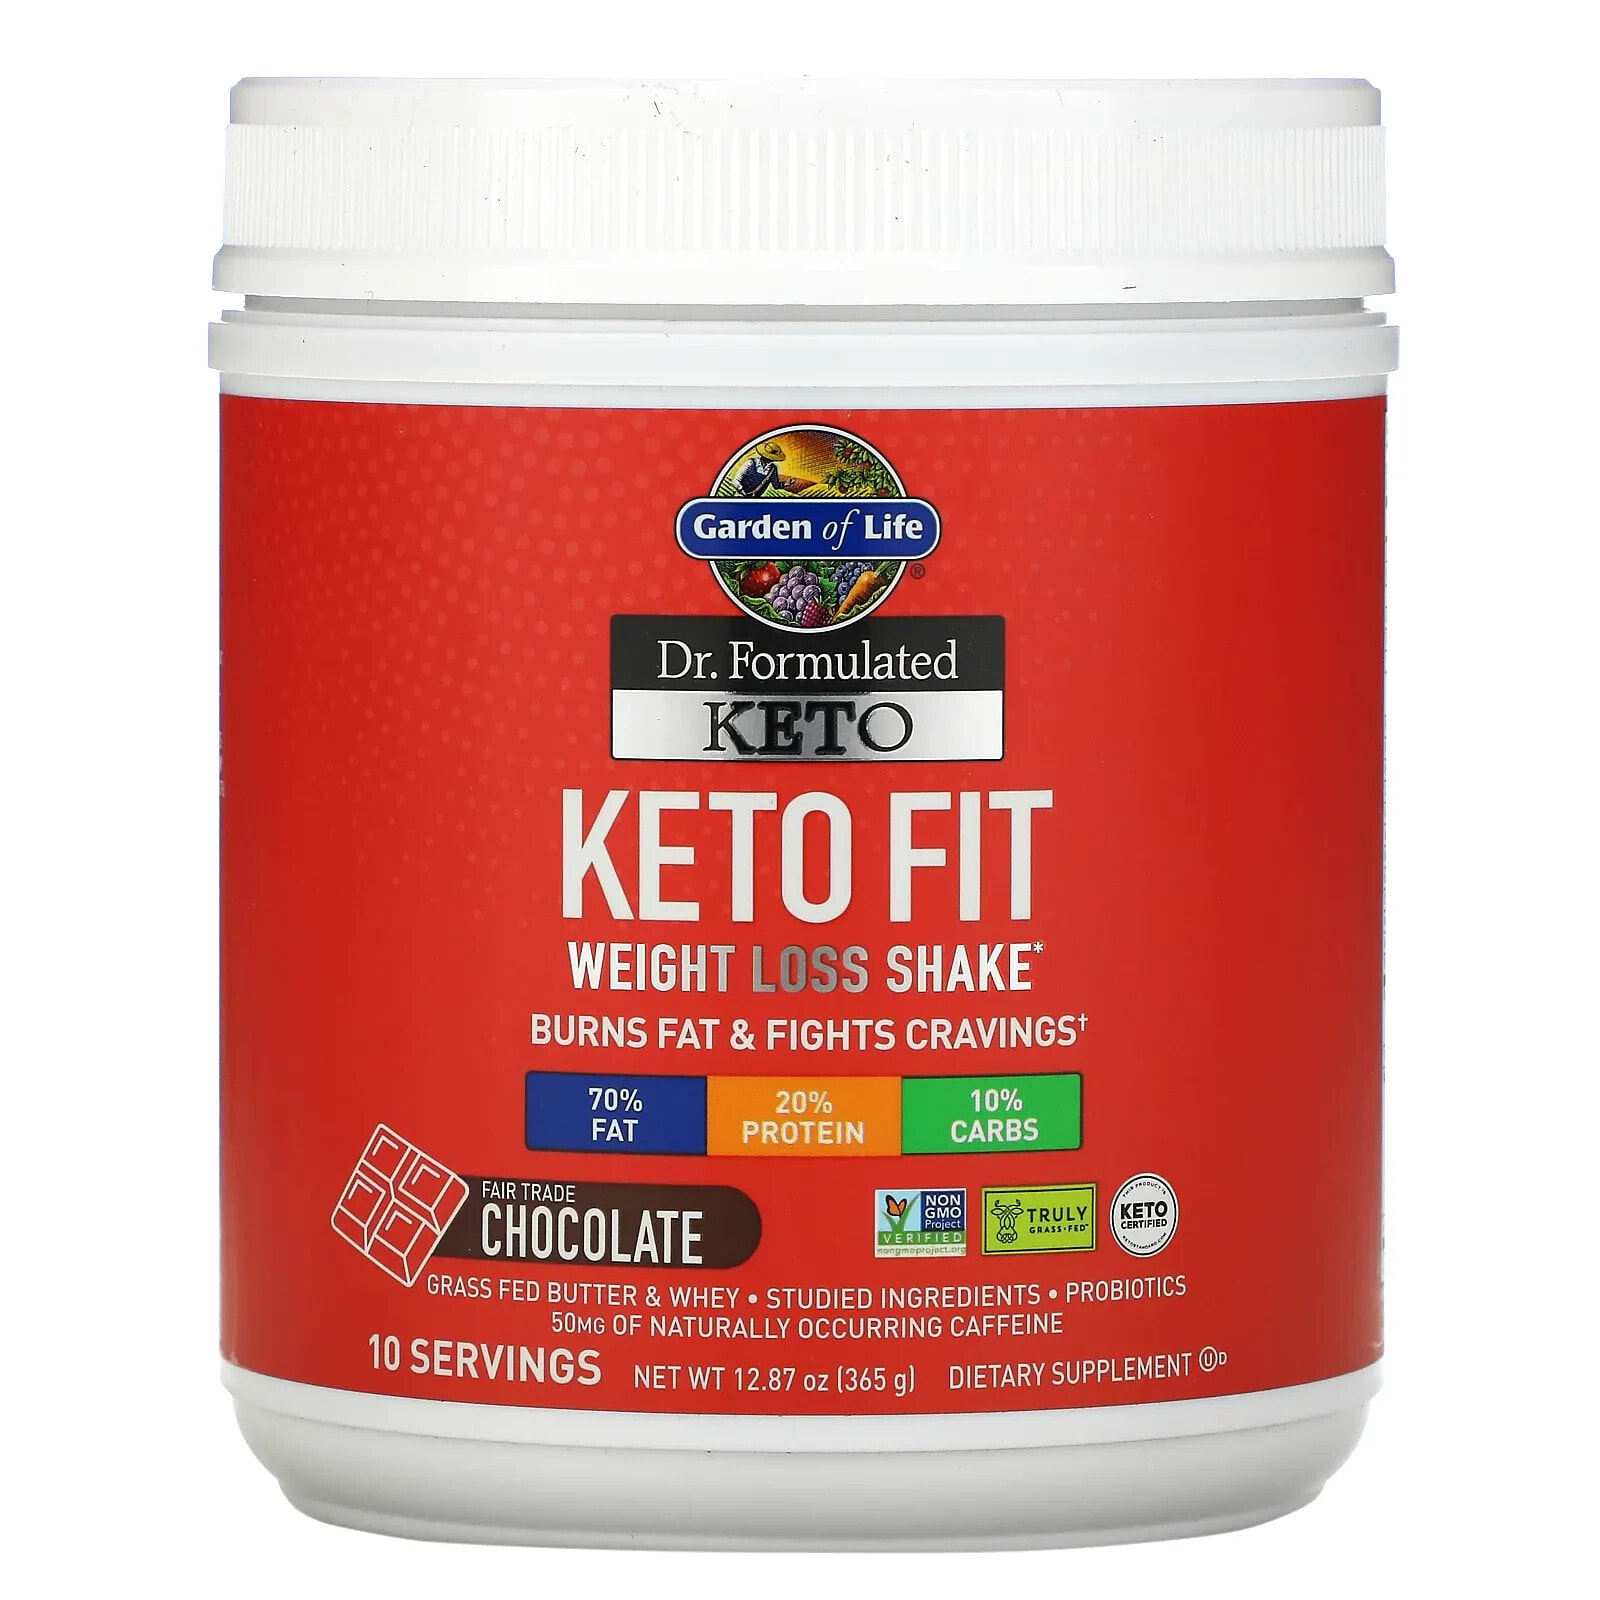 Dr. Formulated, Keto Fit Weight Loss Shake, Chocolate, 12.87 oz (365 g)